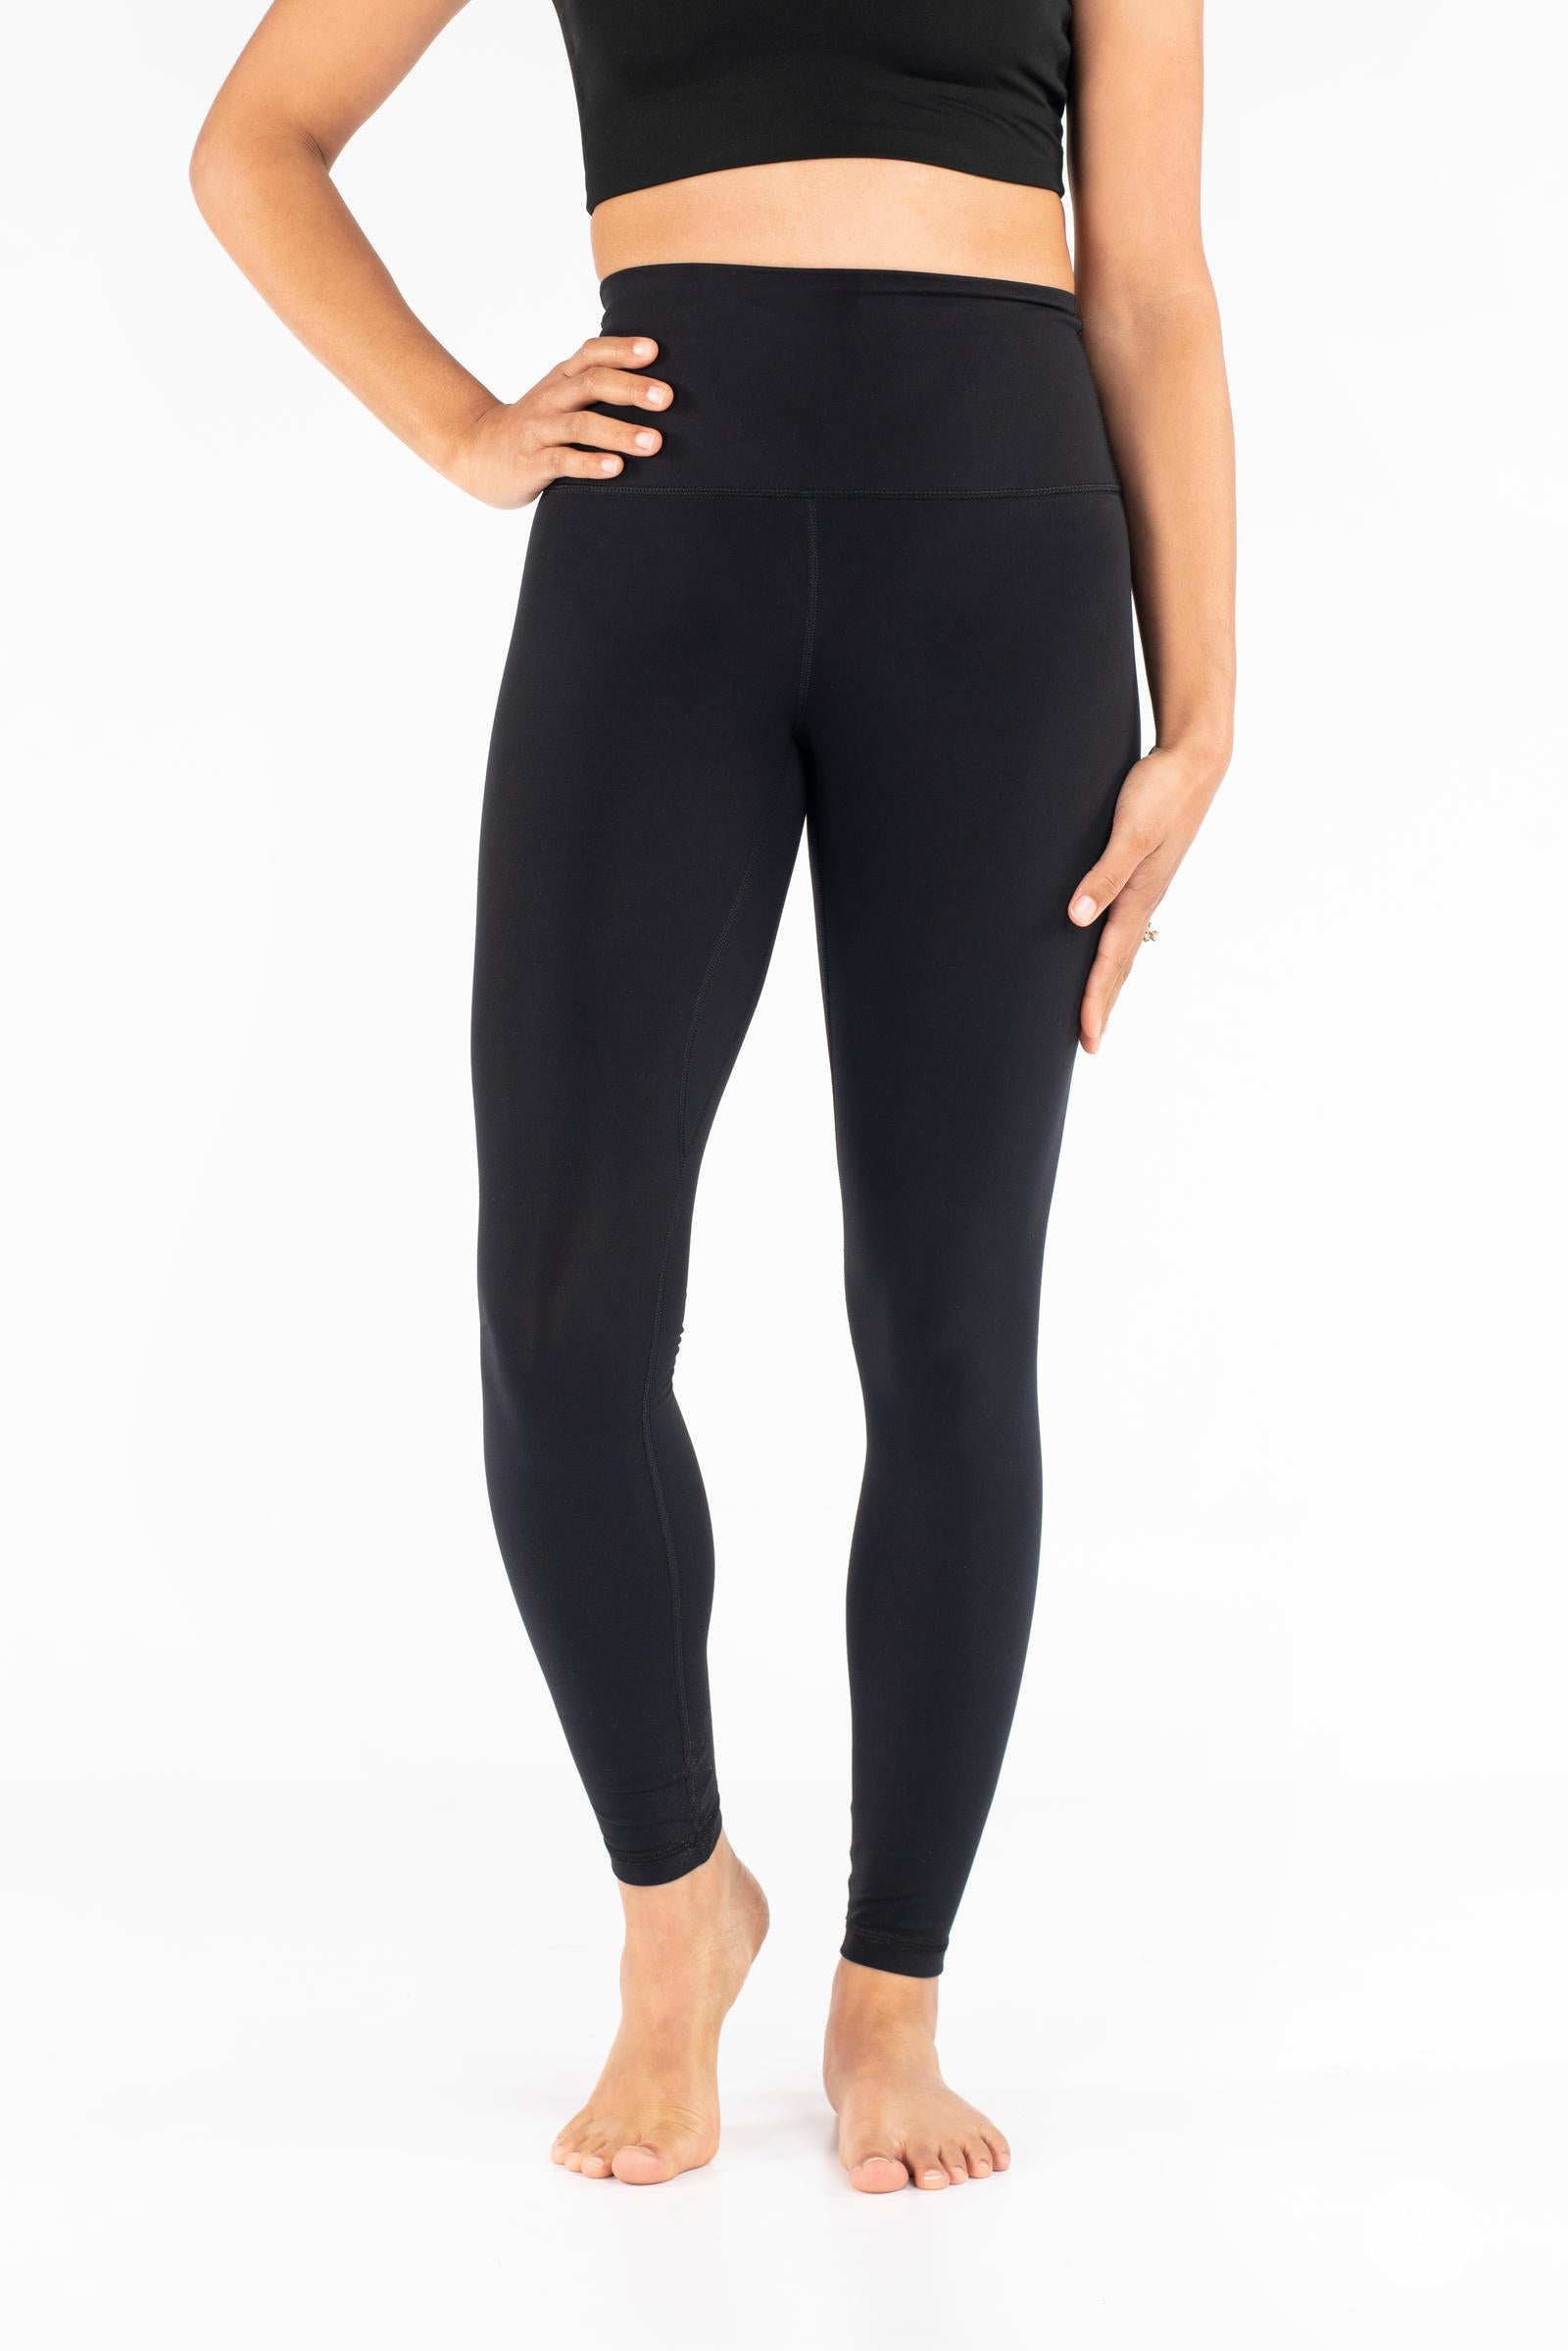 Women's Everyday Soft Ultra High-Rise Bootcut Leggings - All In Motion™  Black XS